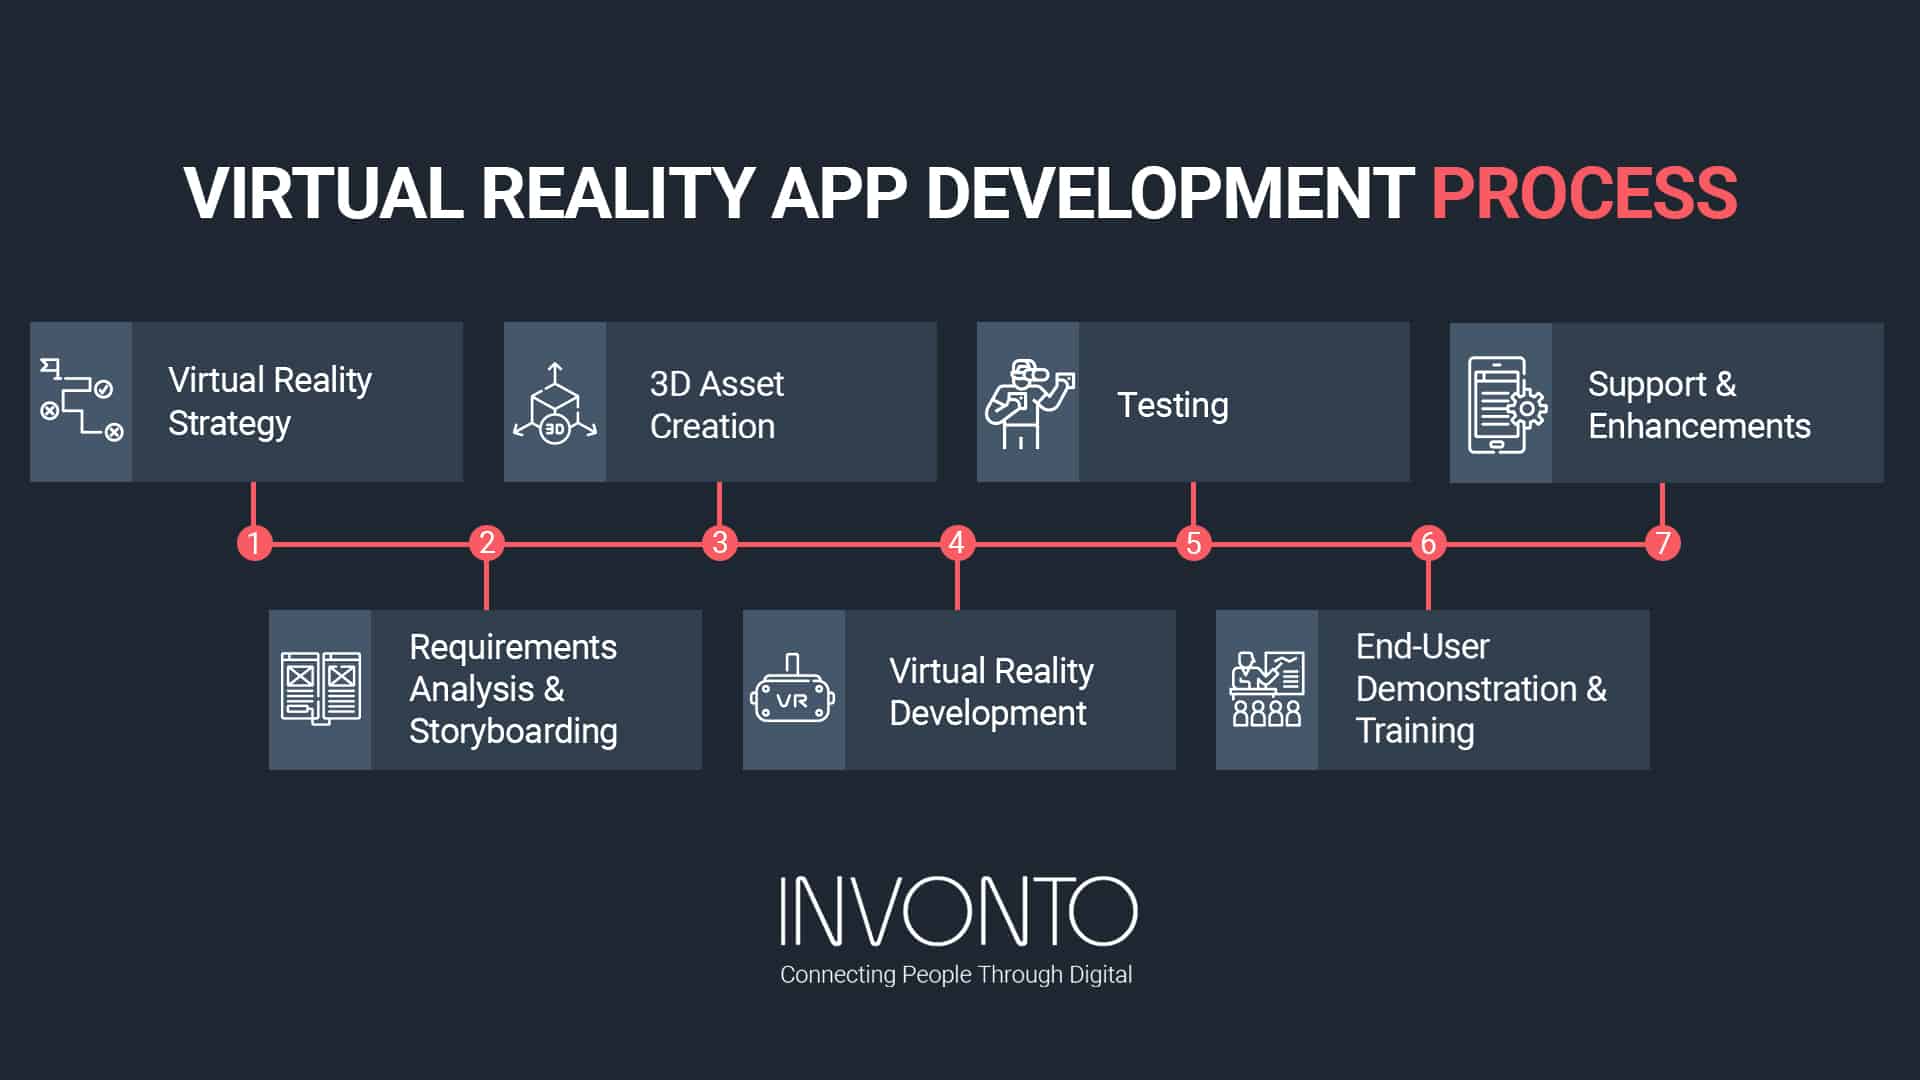 virtual reality app development process infographic by Invonto